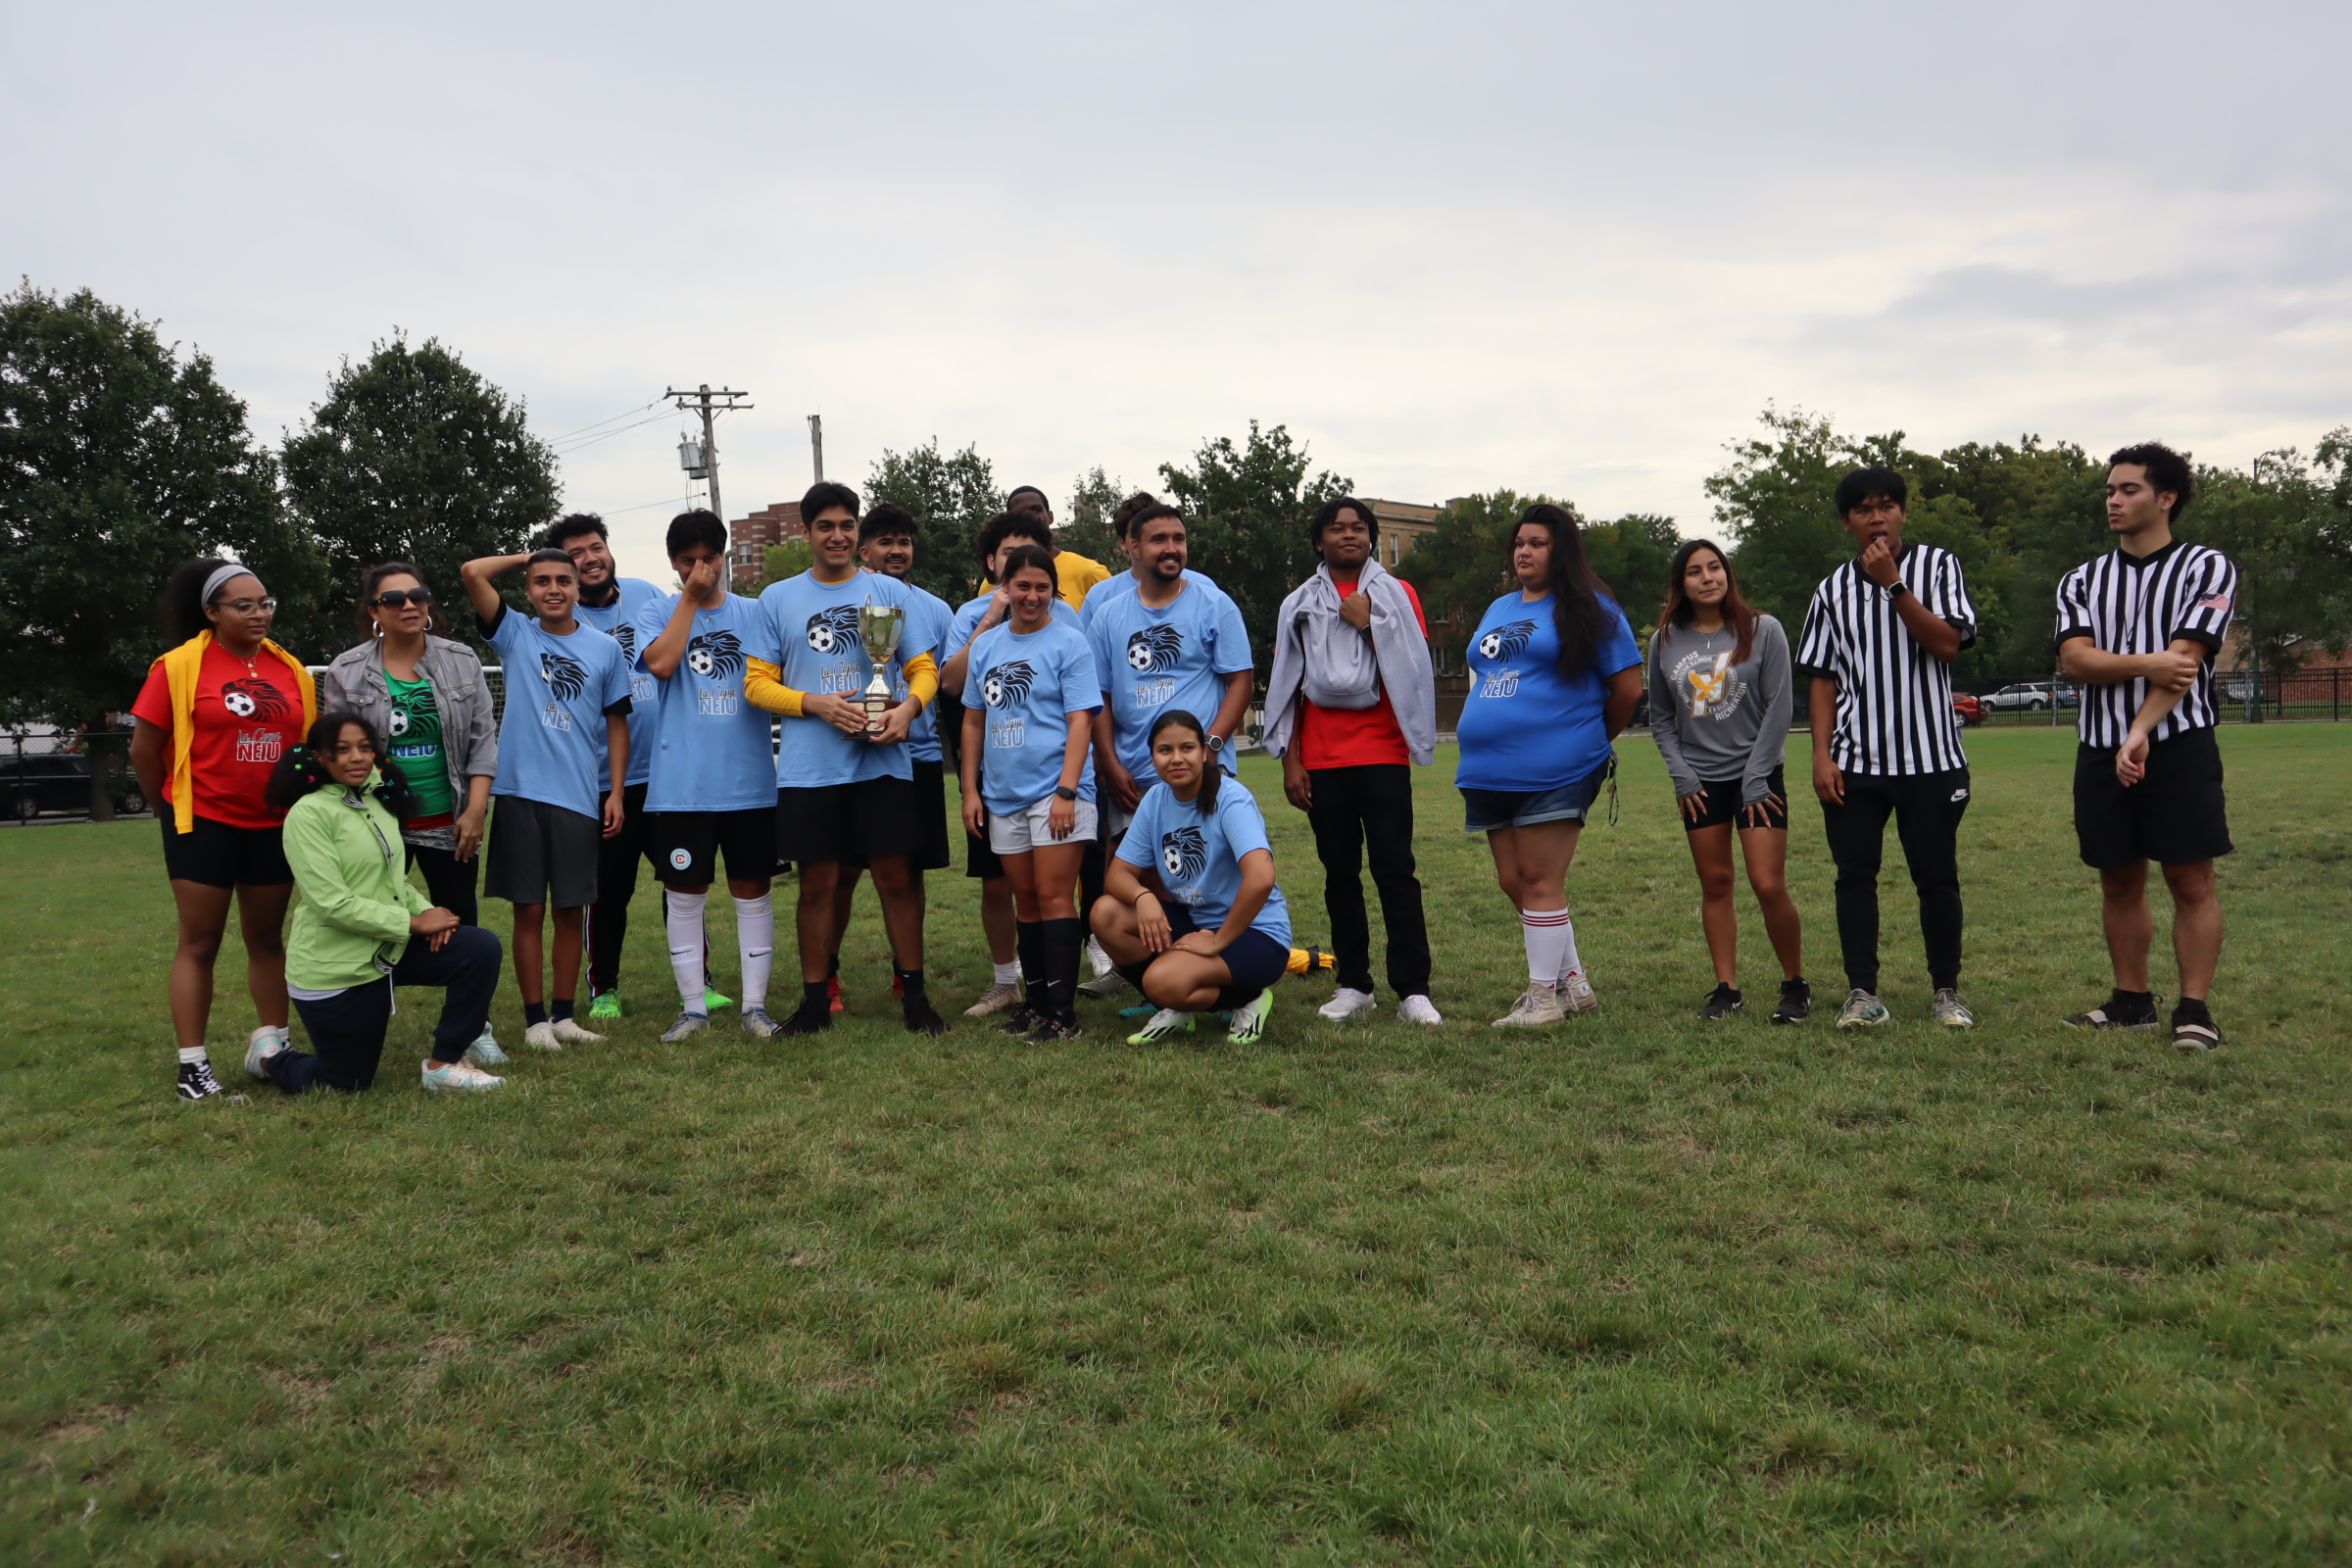 Students posing for a picture after a soccer game